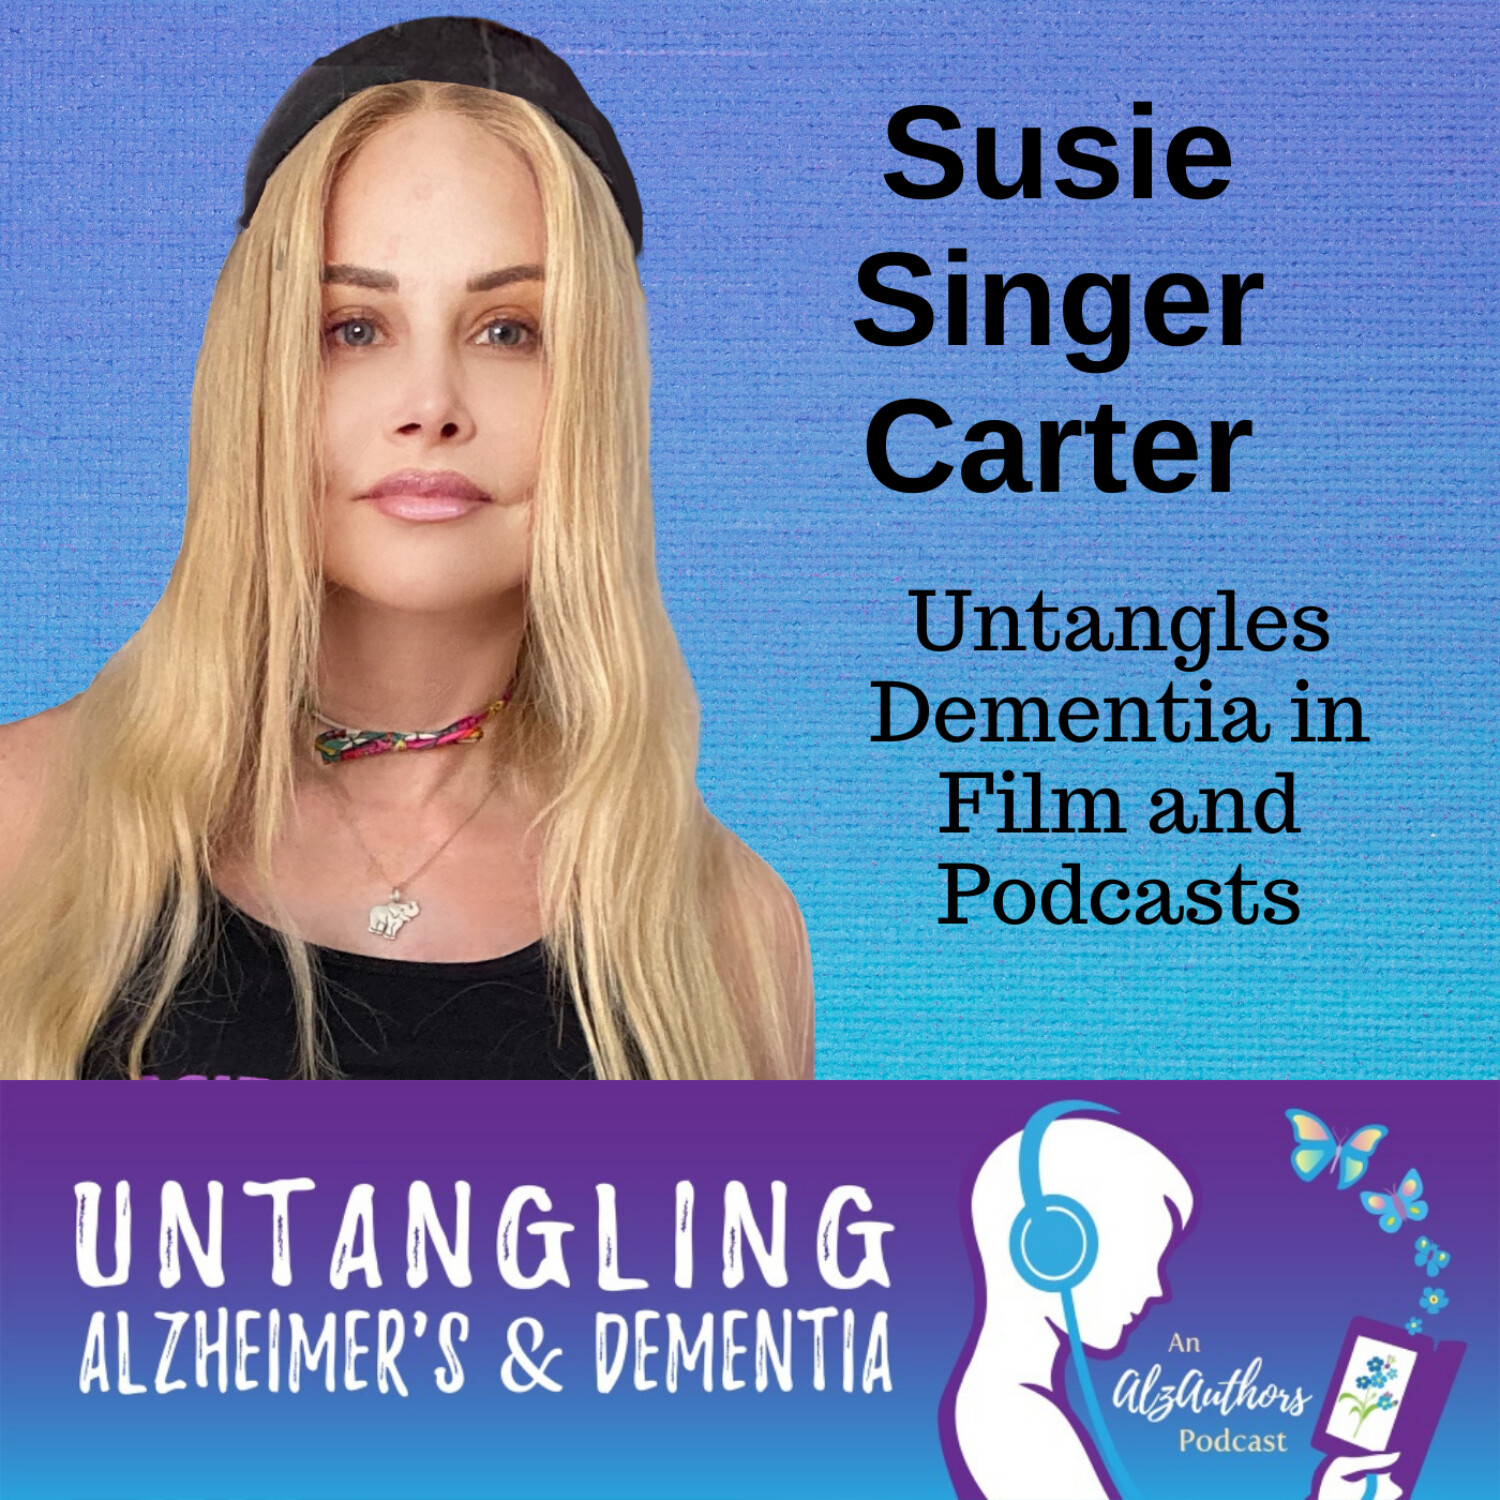 Susie Singer Carter Untangles Alzheimer’s in Film and Podcasts